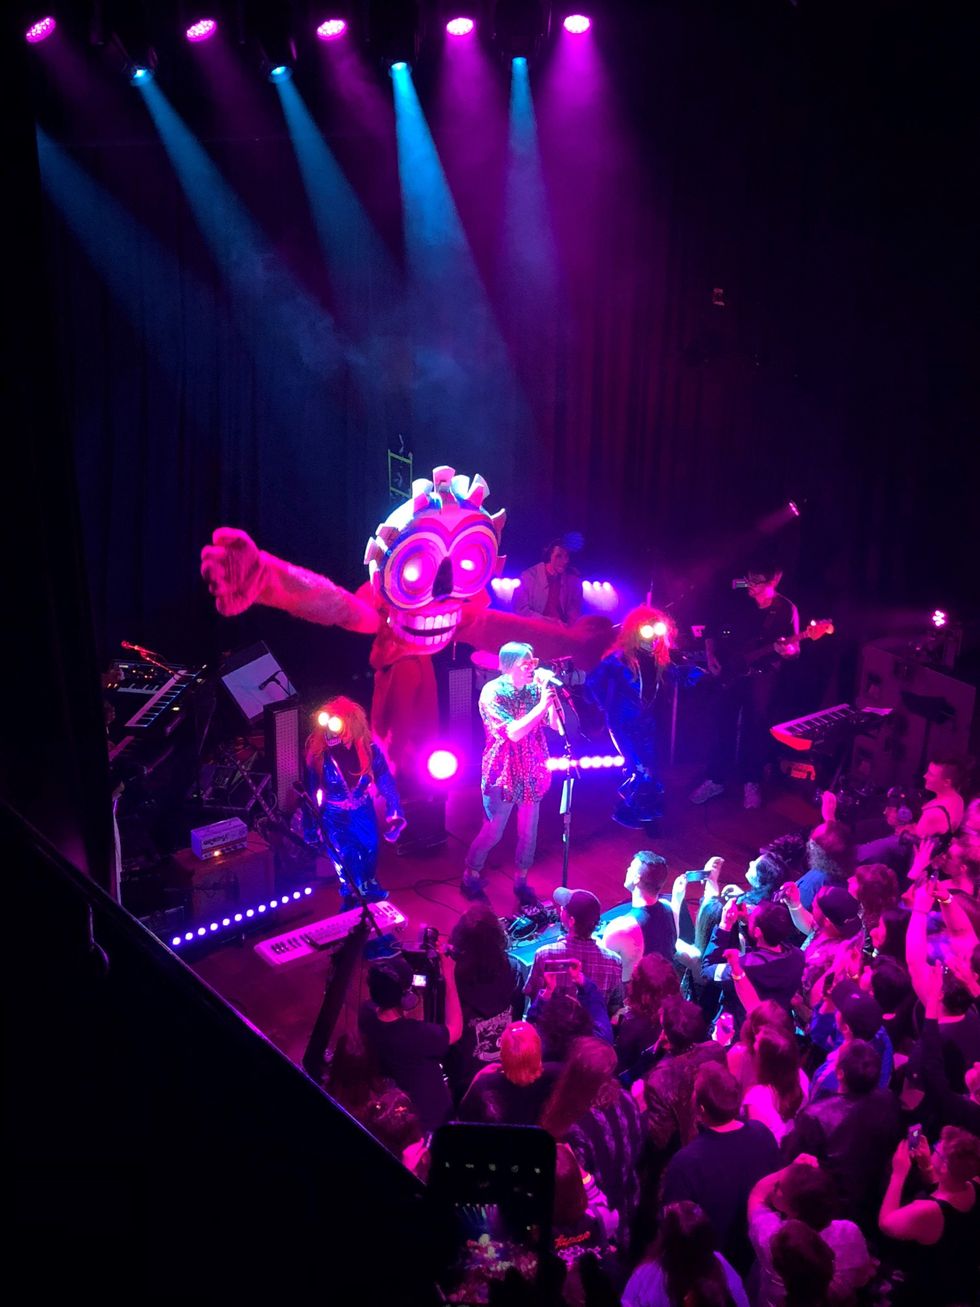 No Shortage Of Dancing With Of Montreal, Live!